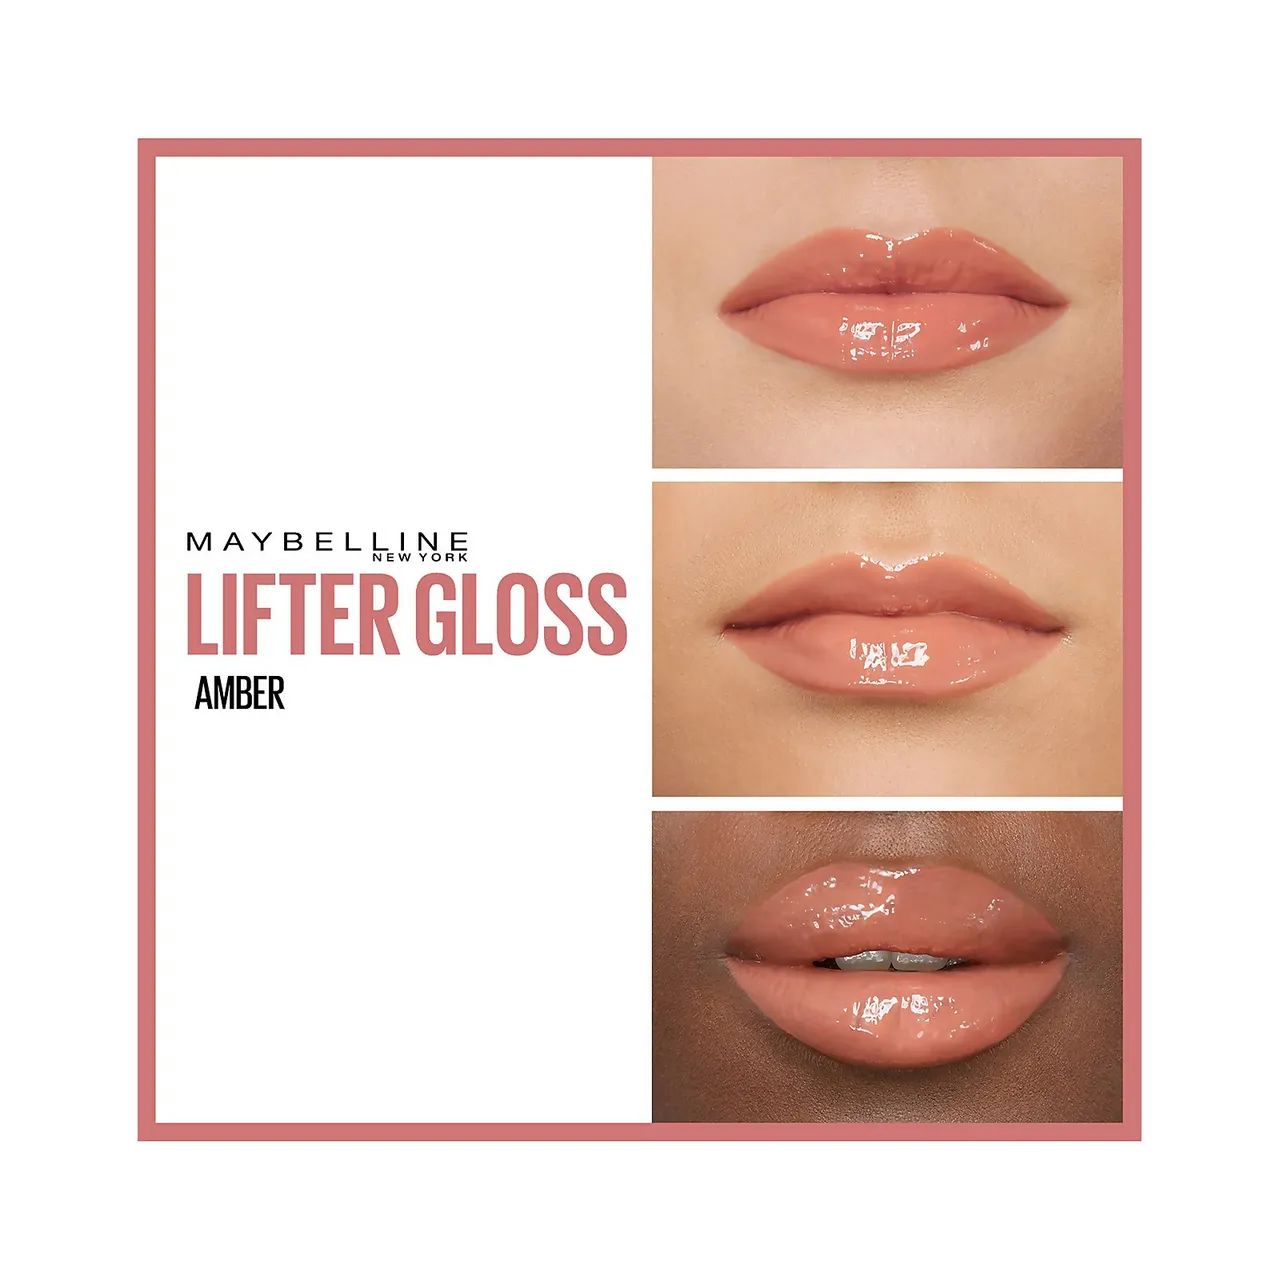 Maybelline Lifter Gloss Hydrating Lip Gloss with Hyaluronic Acid 5g (Various Shades) - 007 Amber